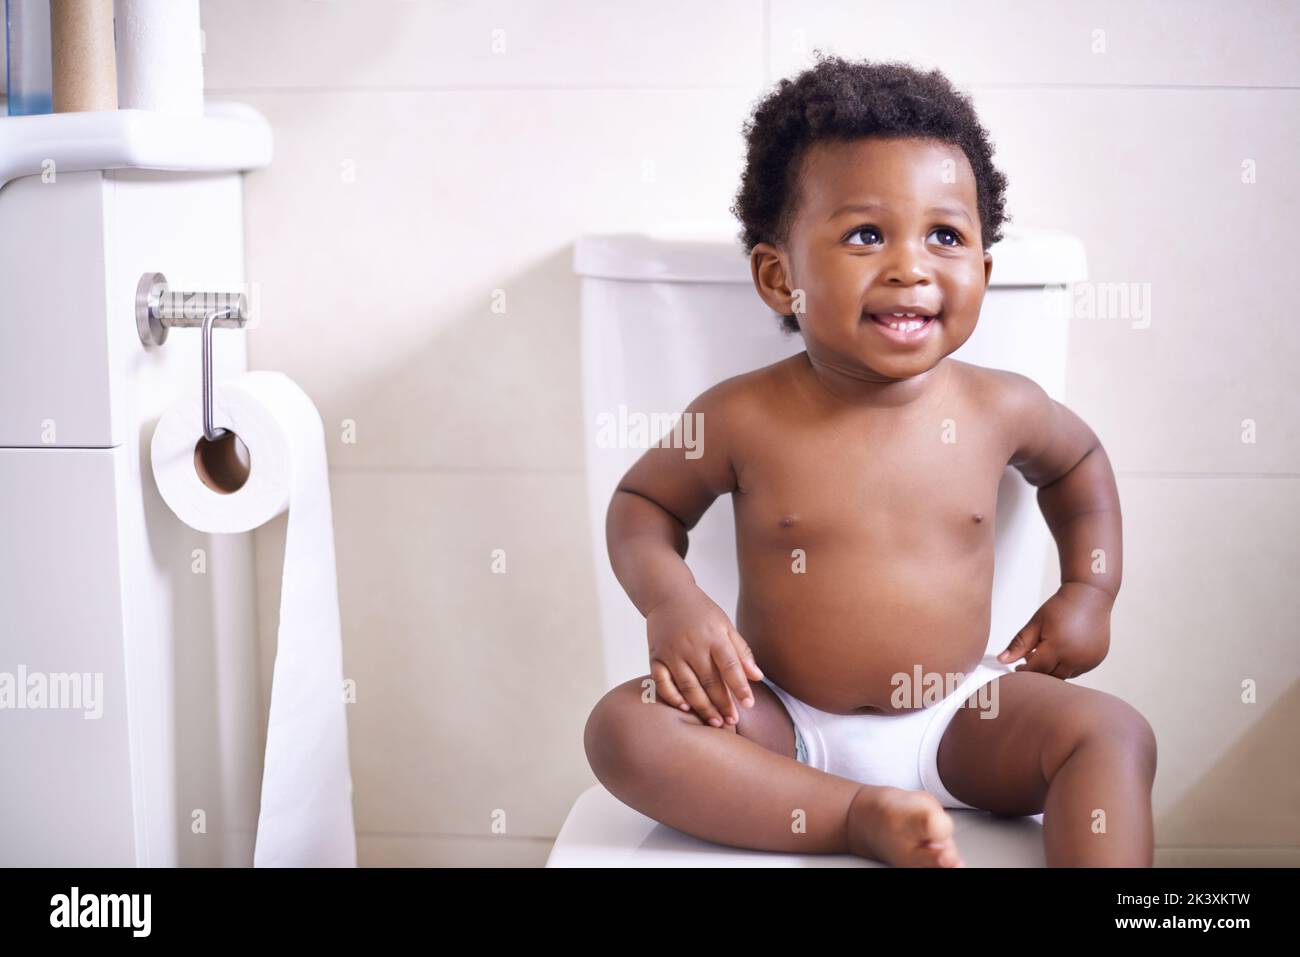 Im gonna ace this potty training thing. an adorable baby boy sitting on the toilet in the bathroom. Stock Photo